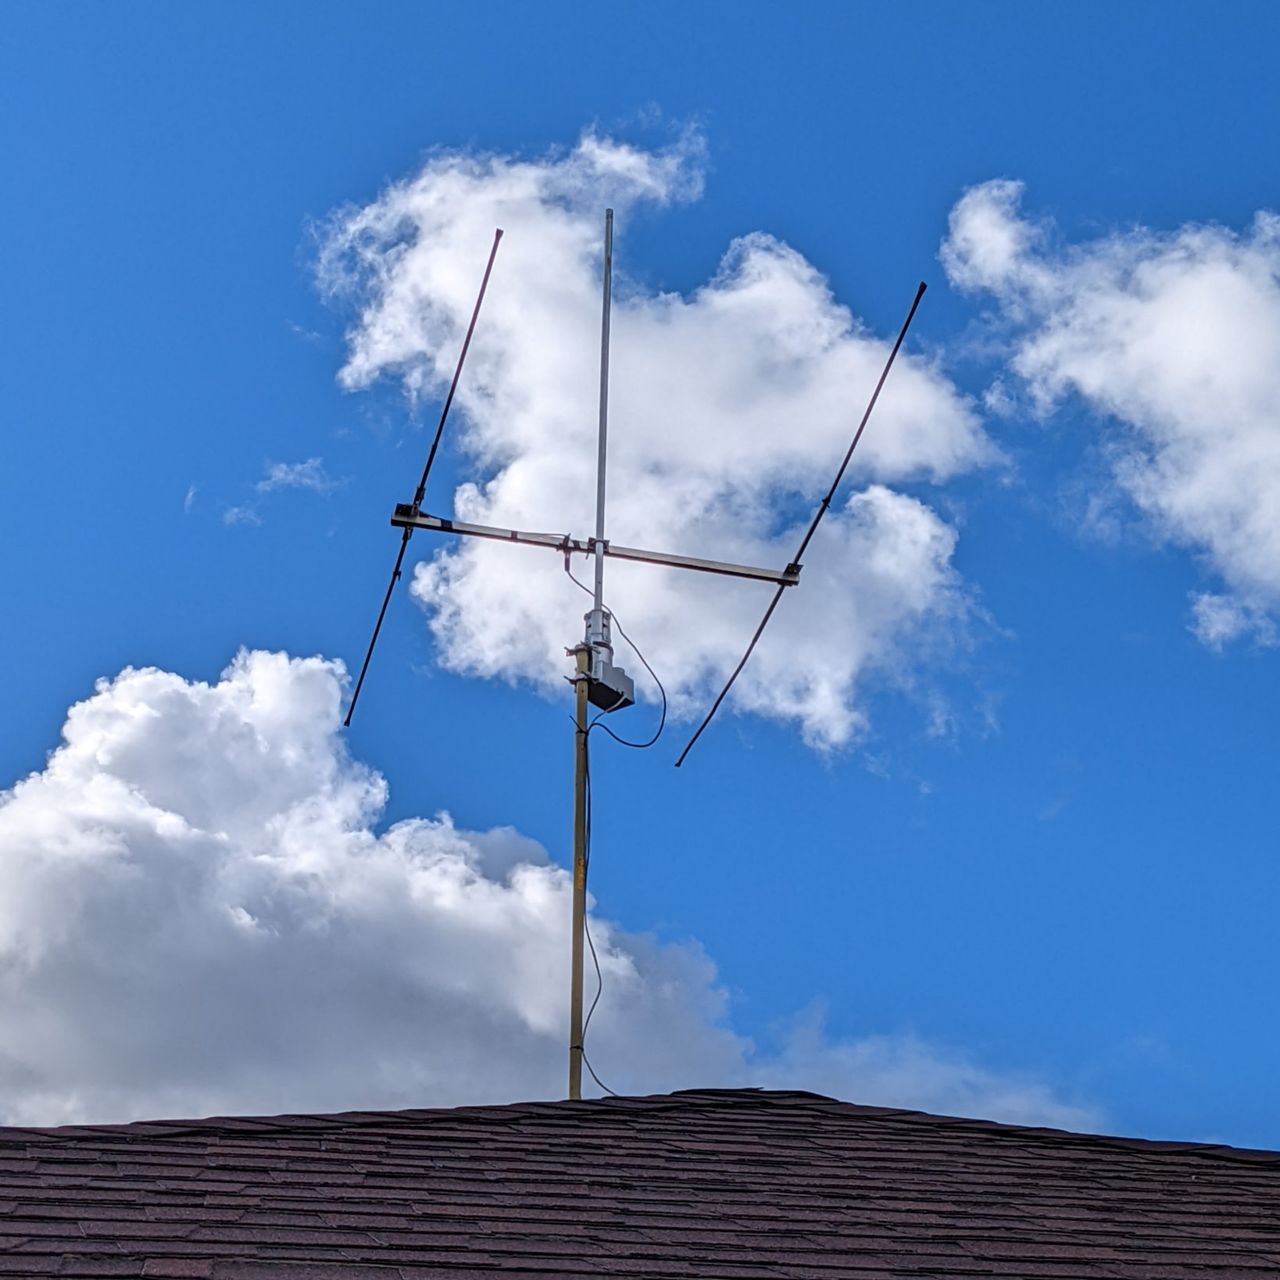 6m antenna in front of a blue sky with clouds